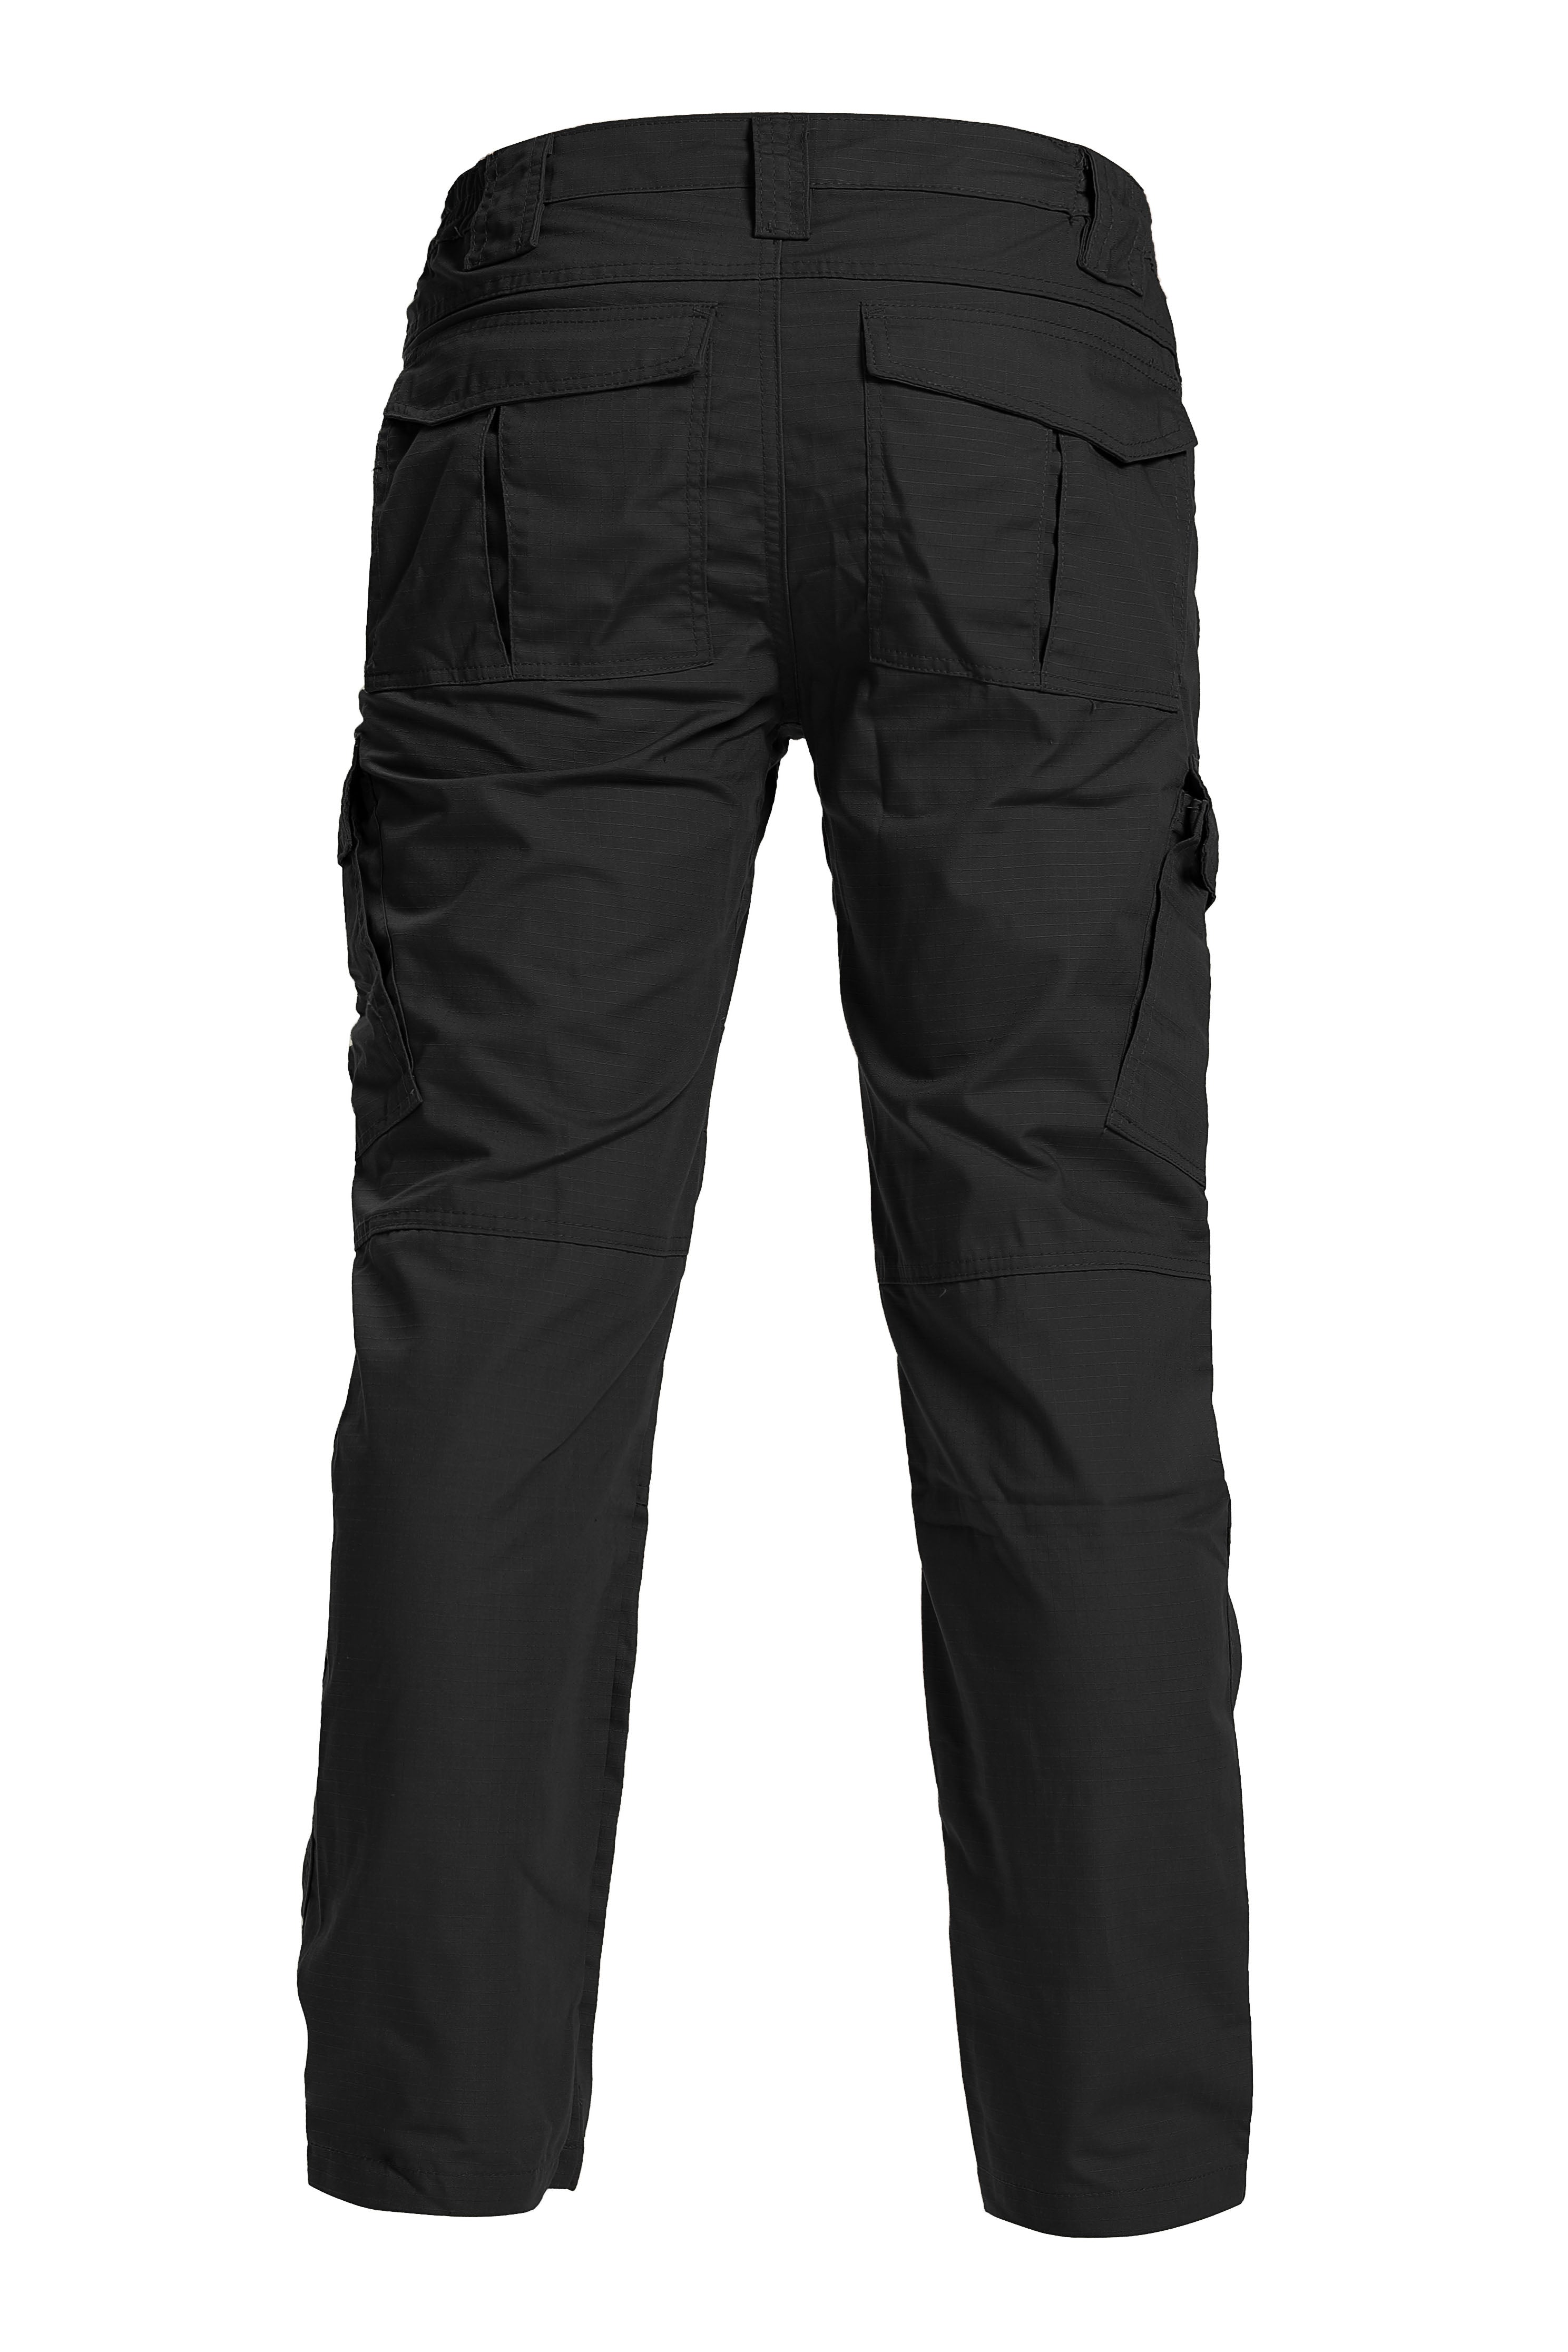 American Eagle Outfitters Slim Fit Men Black Trousers - Buy American Eagle  Outfitters Slim Fit Men Black Trousers Online at Best Prices in India |  Flipkart.com